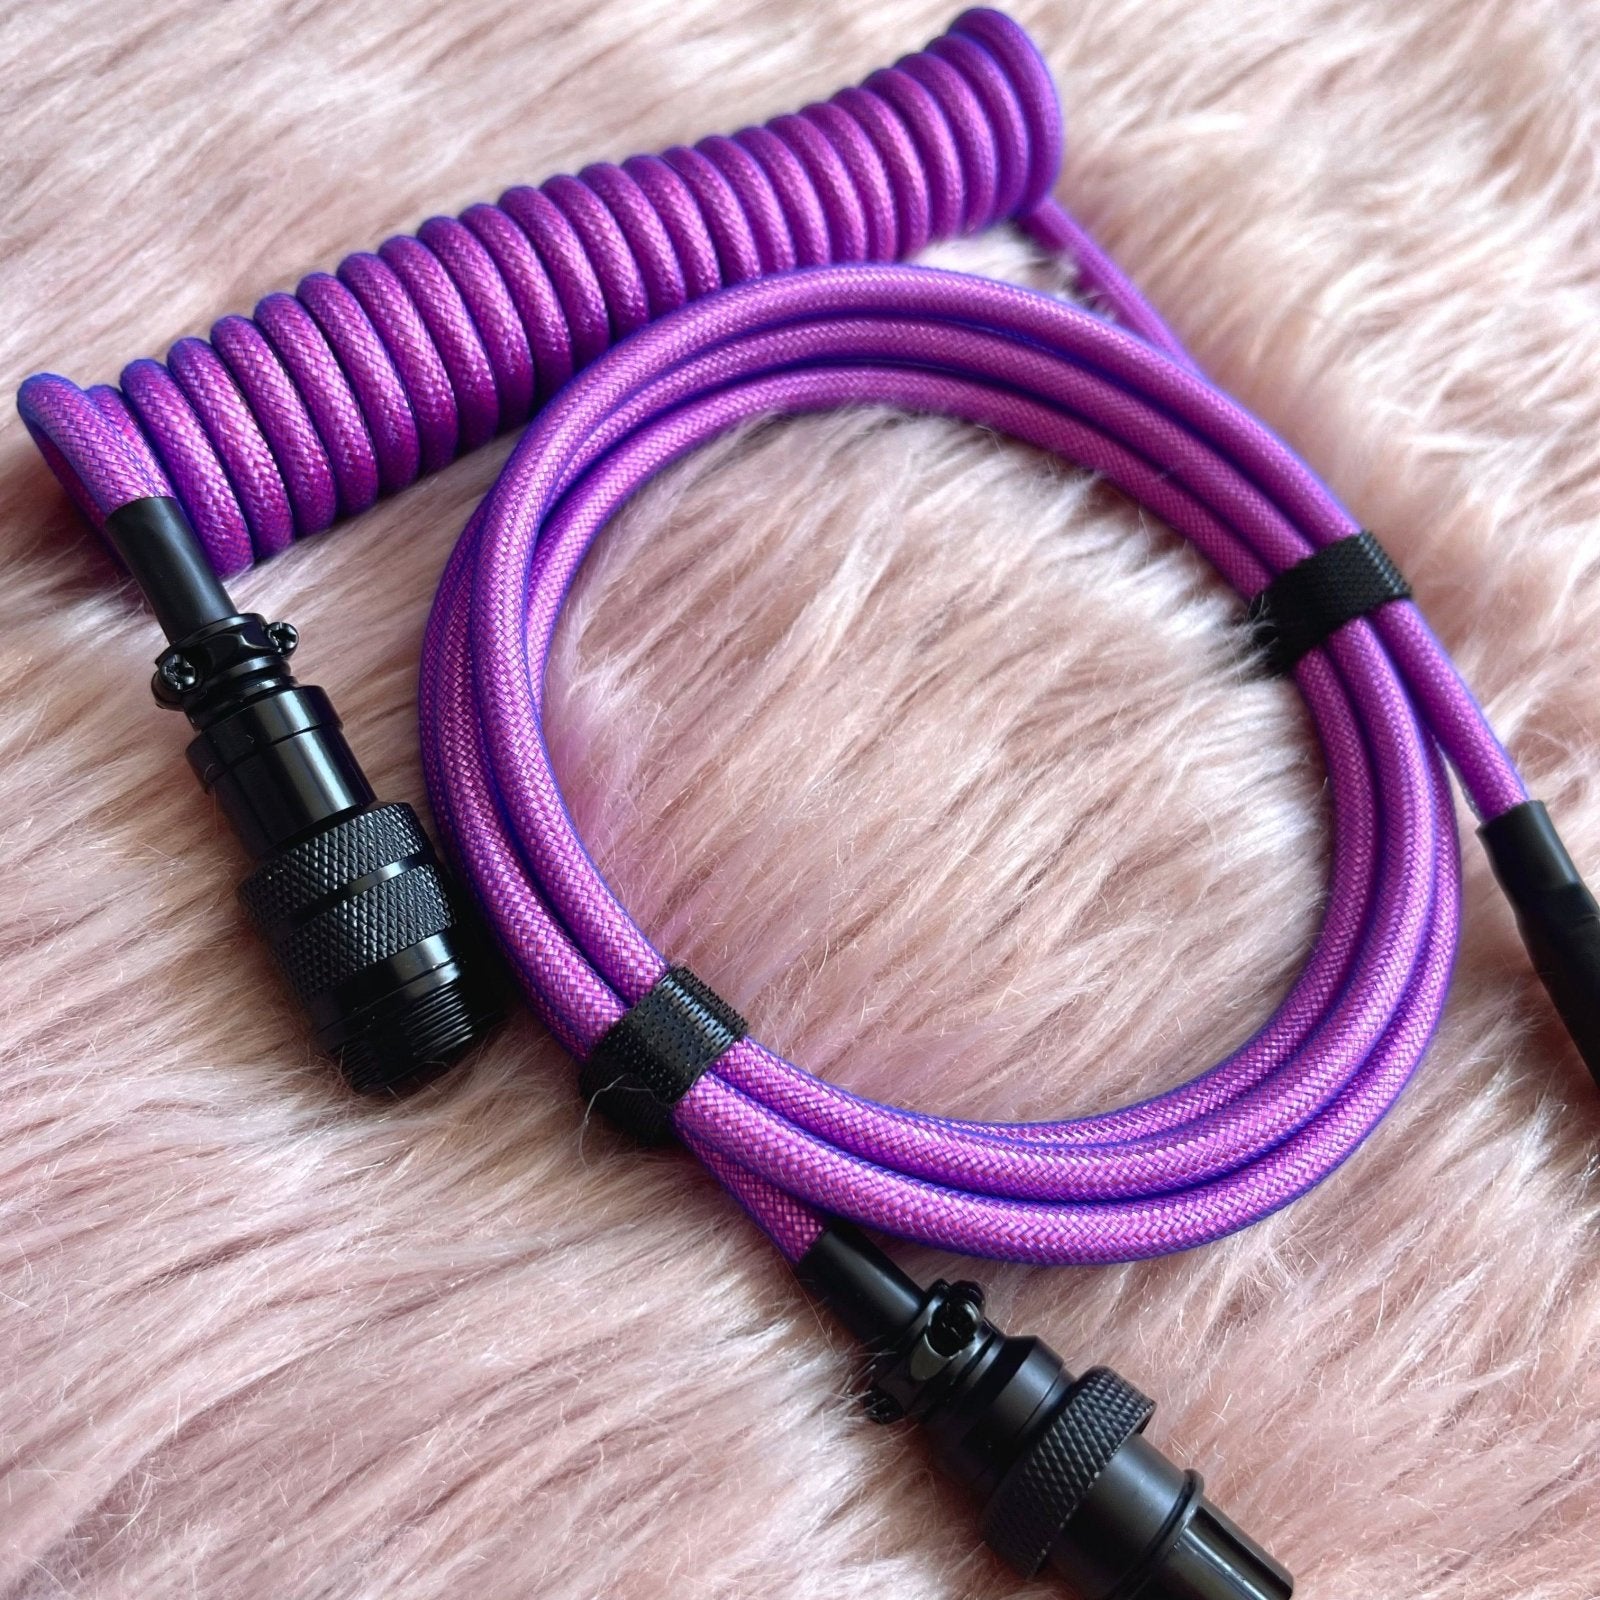 CUSTOM COILED CABLE GX16 -Purple - CLS Tech | CLS Tech